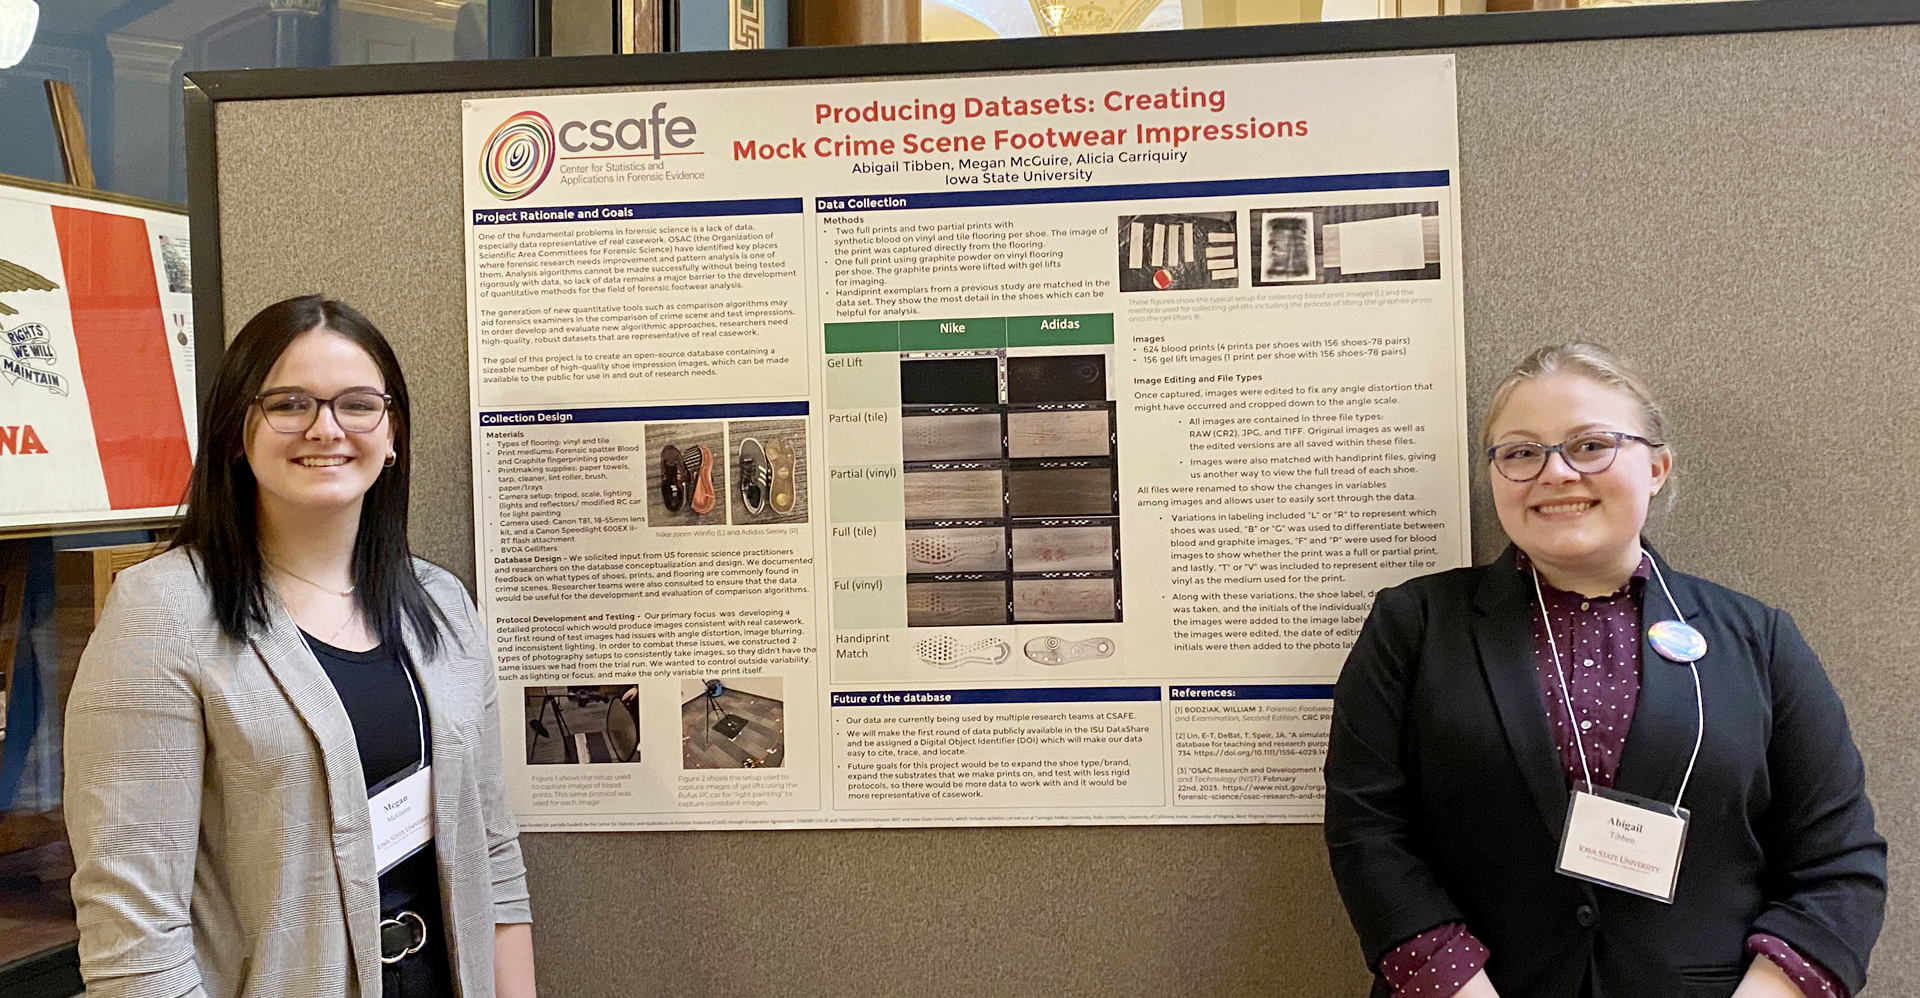 Megan McGuire (left) and Abigail Tibben presented their research project on producing a mock crime scene footwear impressions dataset. 